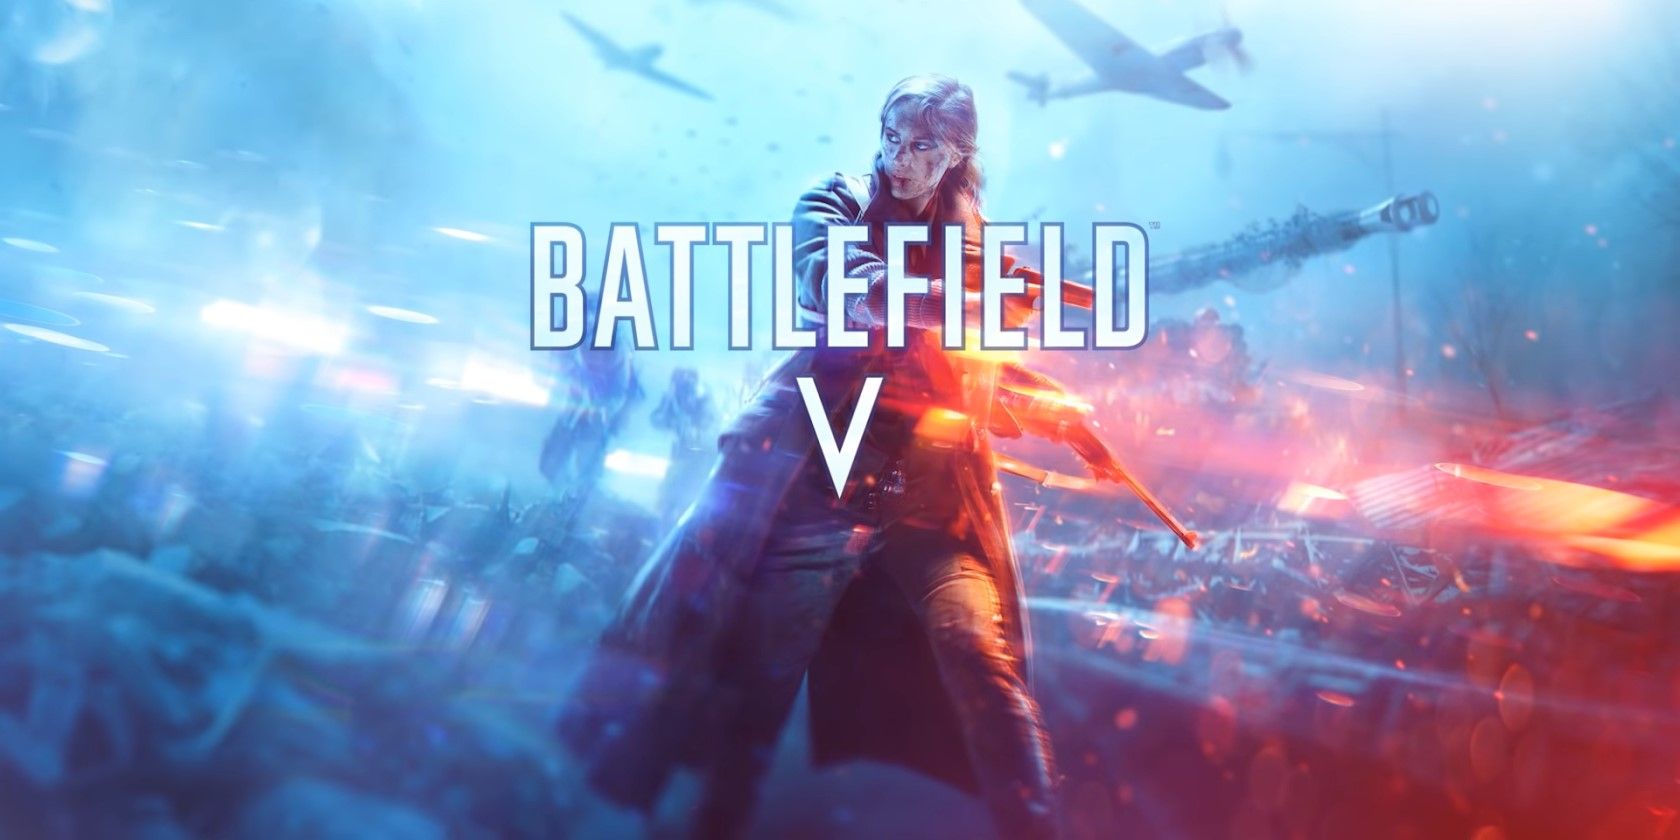 BATTLEFIELD 5 RSP CONFIRMED And It's FREE! - Battlefield V